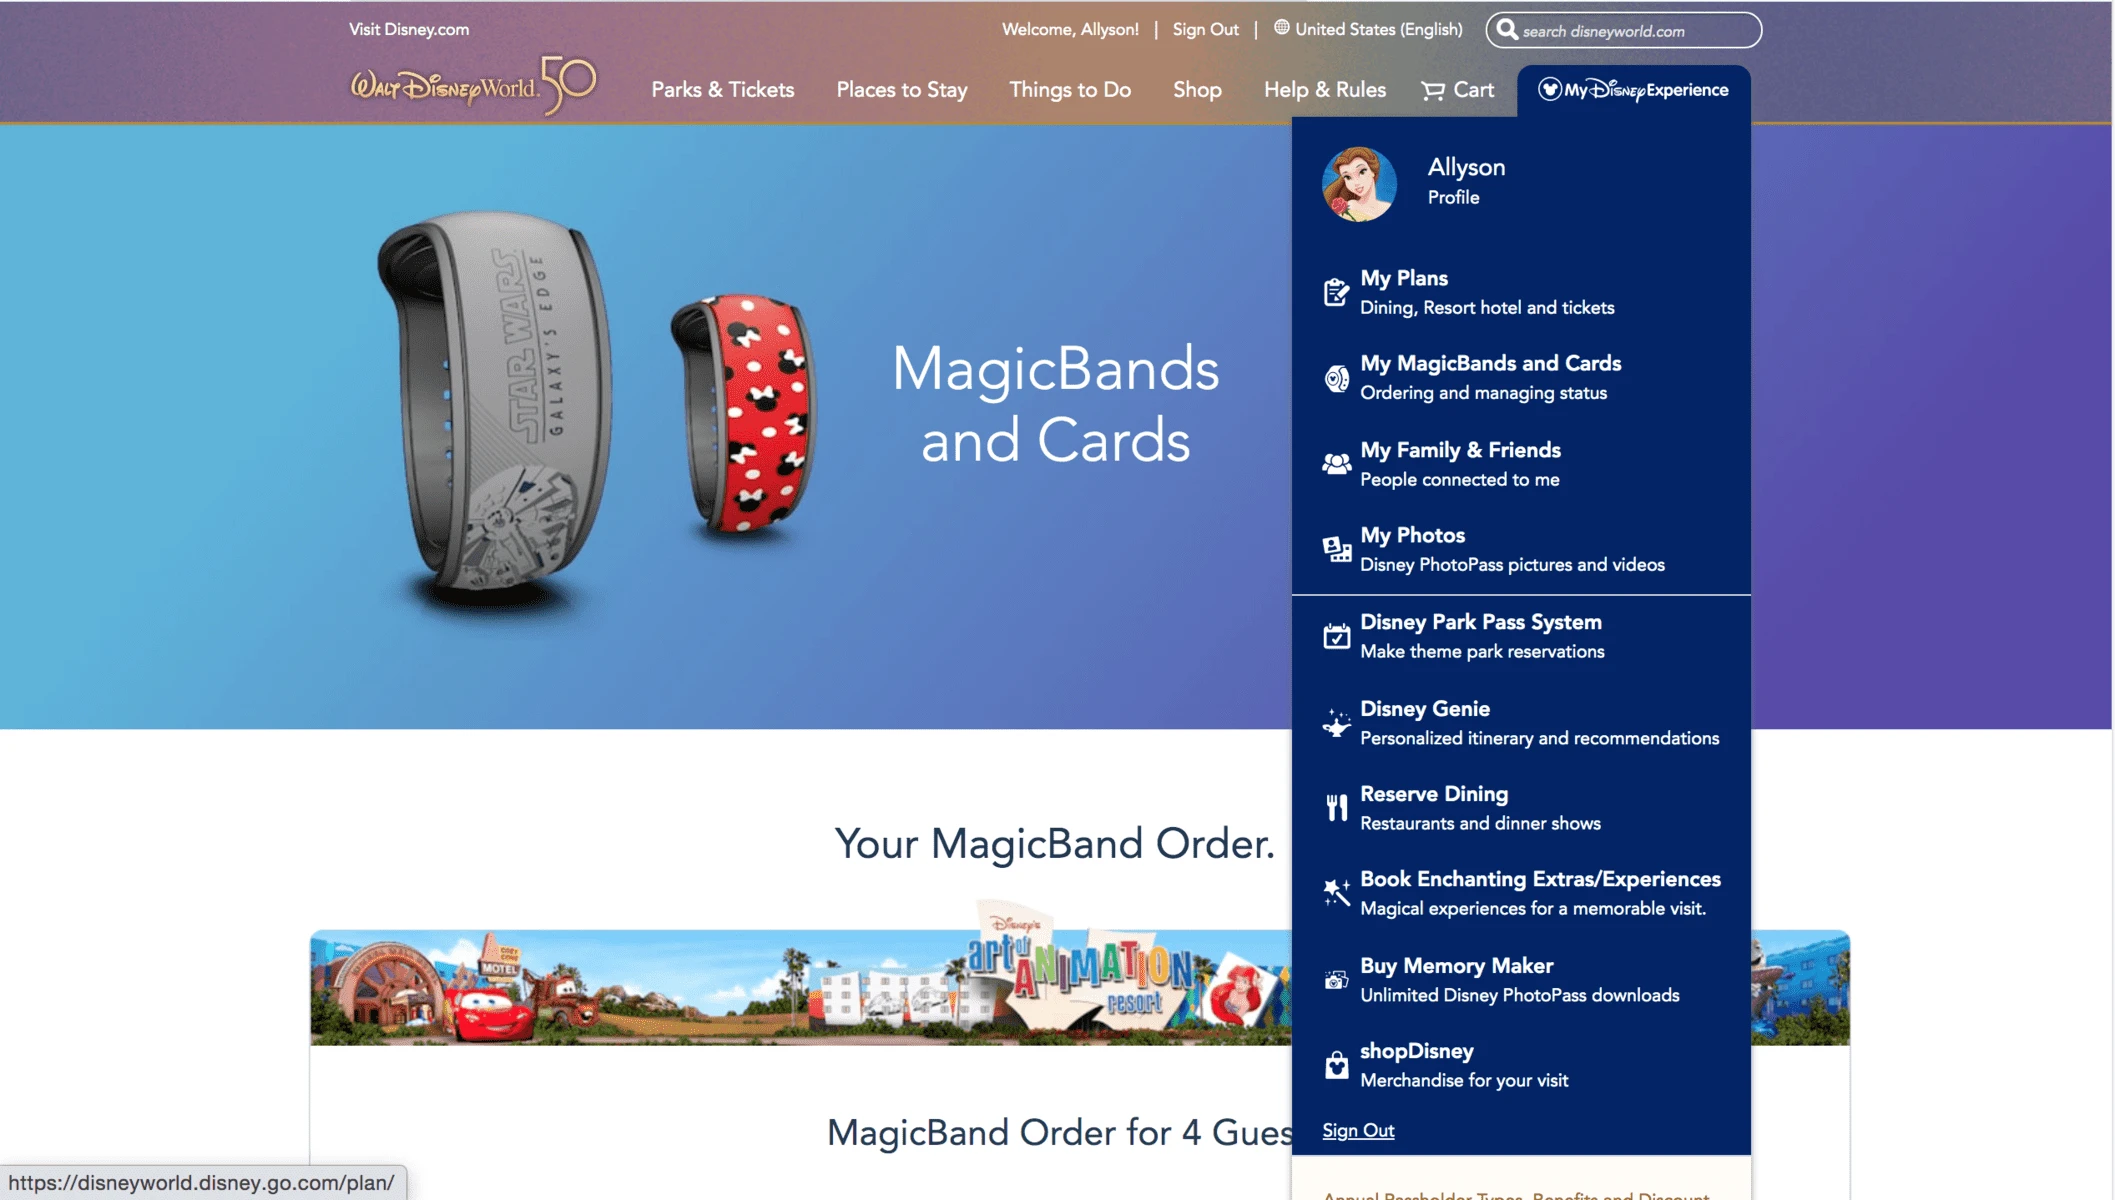 accessing magicbands on the walt disney world website